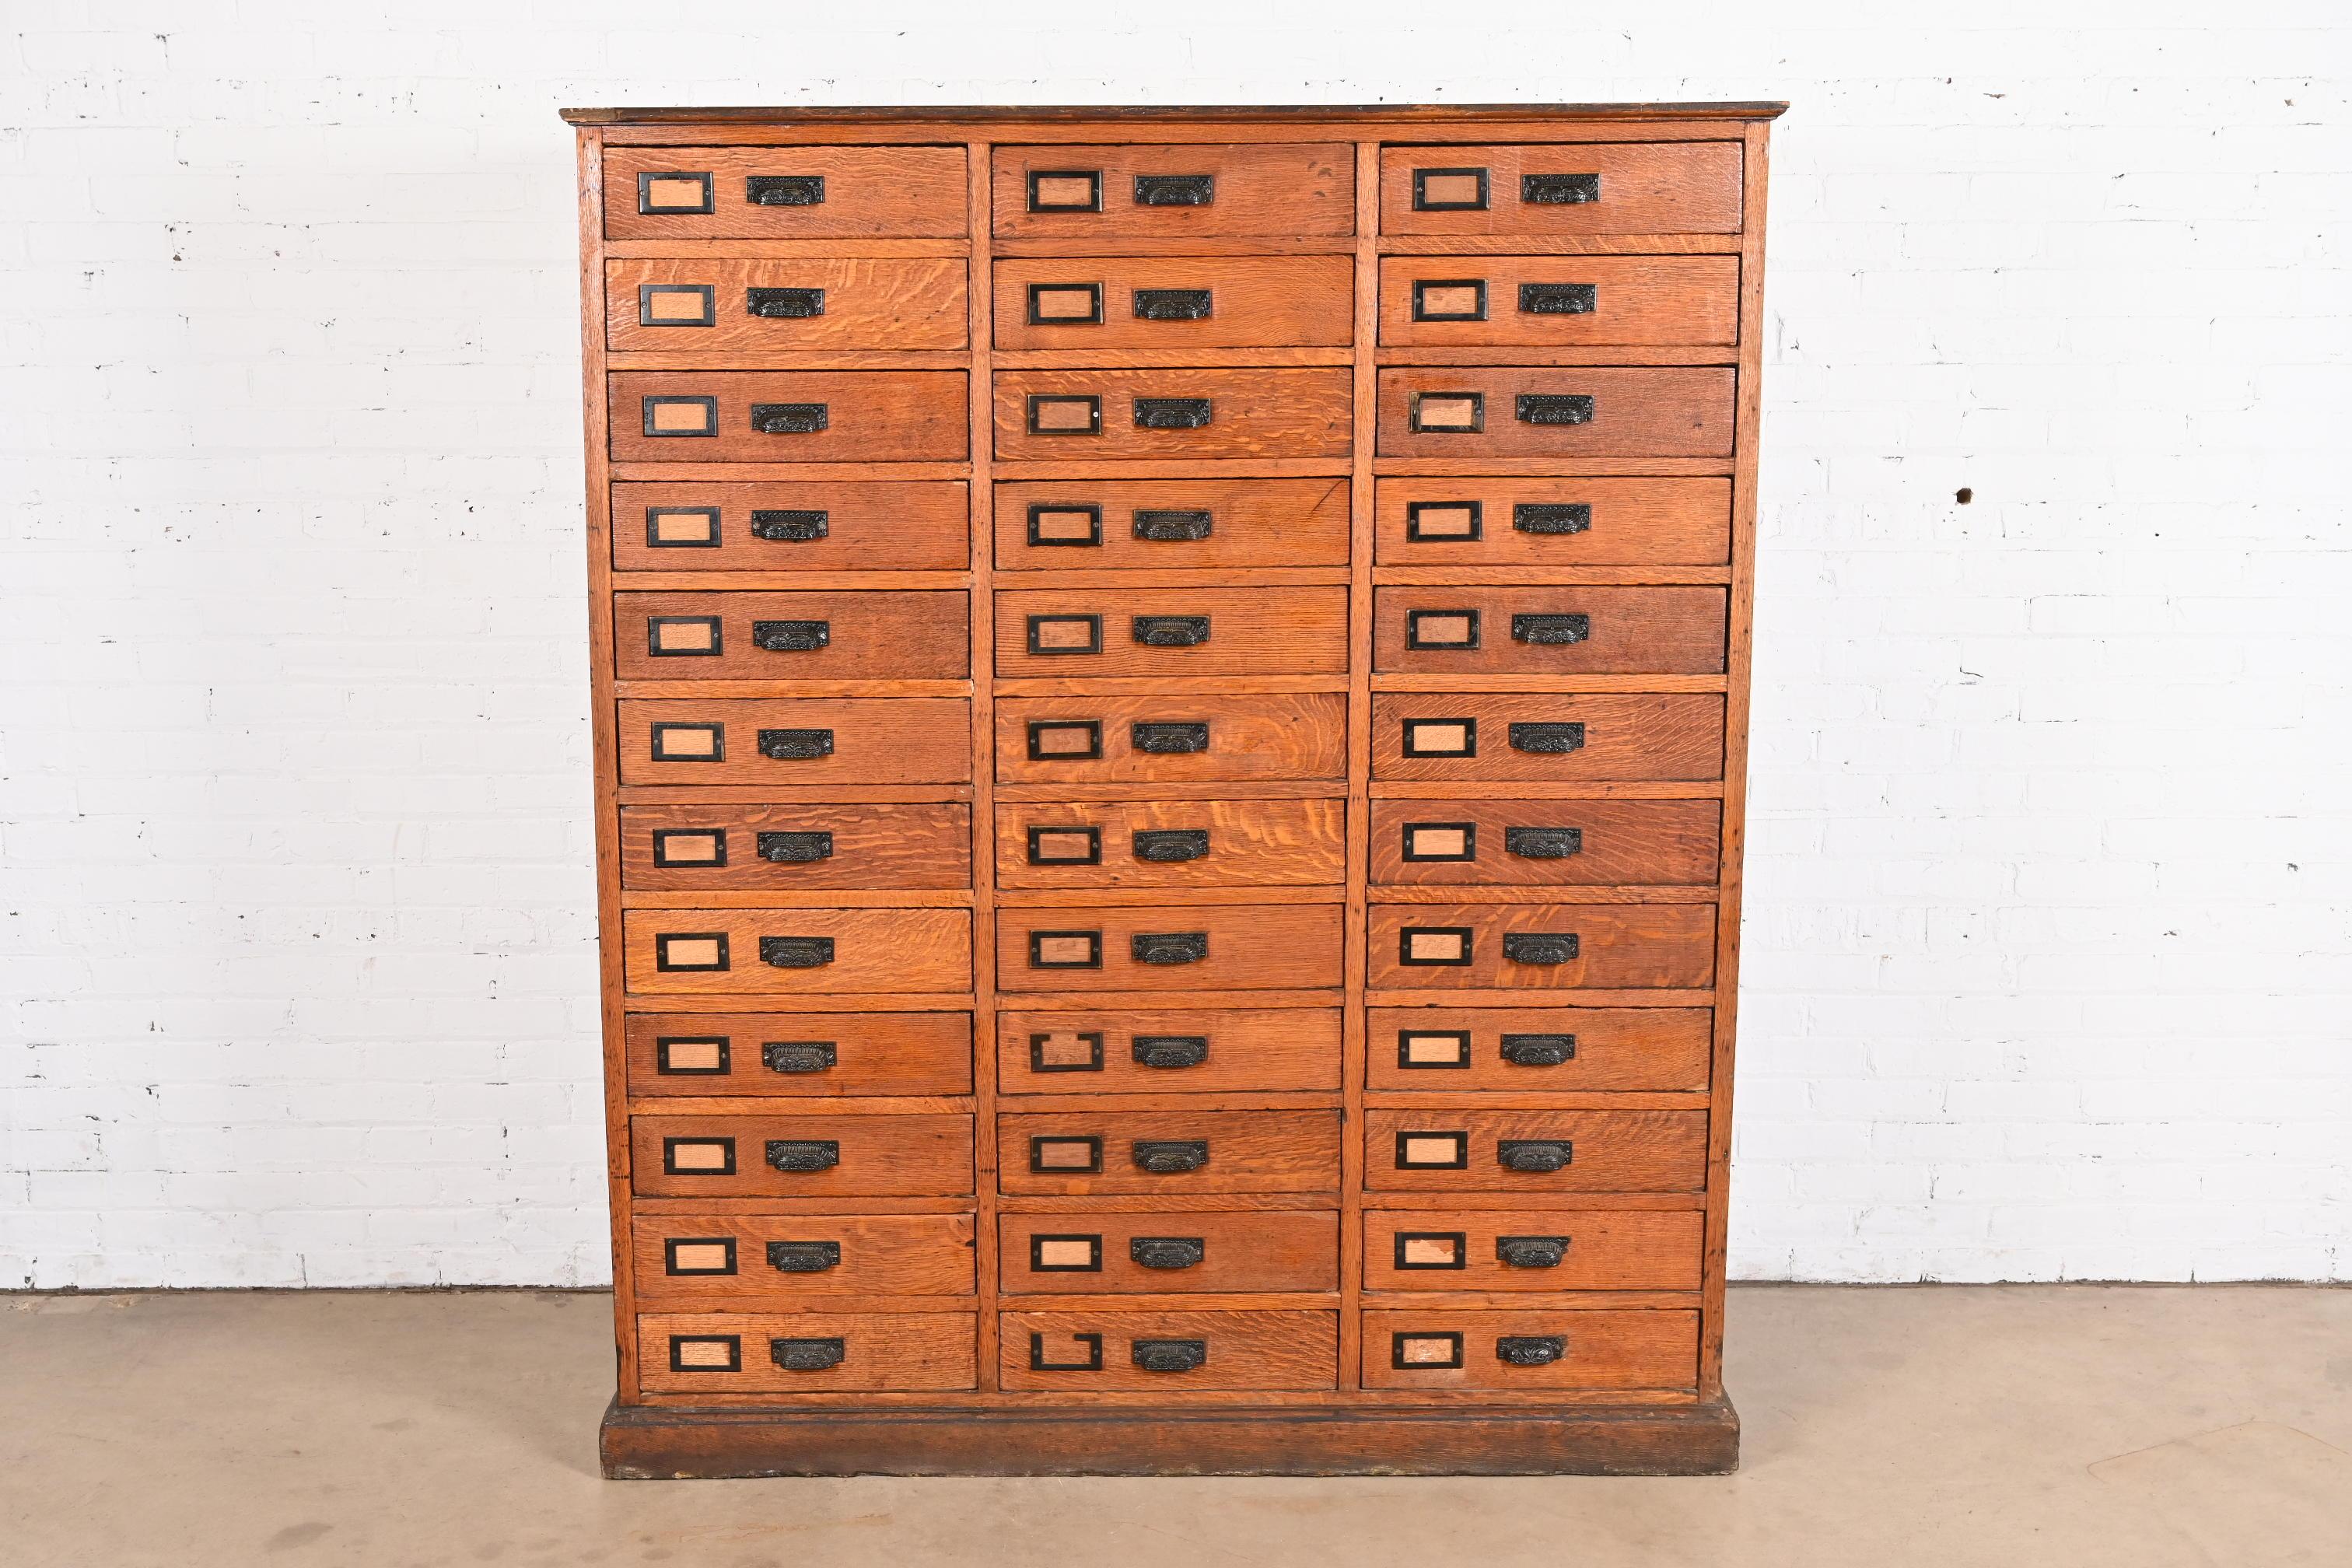 A rare monumental antique Arts & Crafts or Late Victorian 36-drawer file cabinet or chest of drawers

USA, Circa 1900

Solid quarter-sawn oak, with iron hardware.

Measures: 59.5